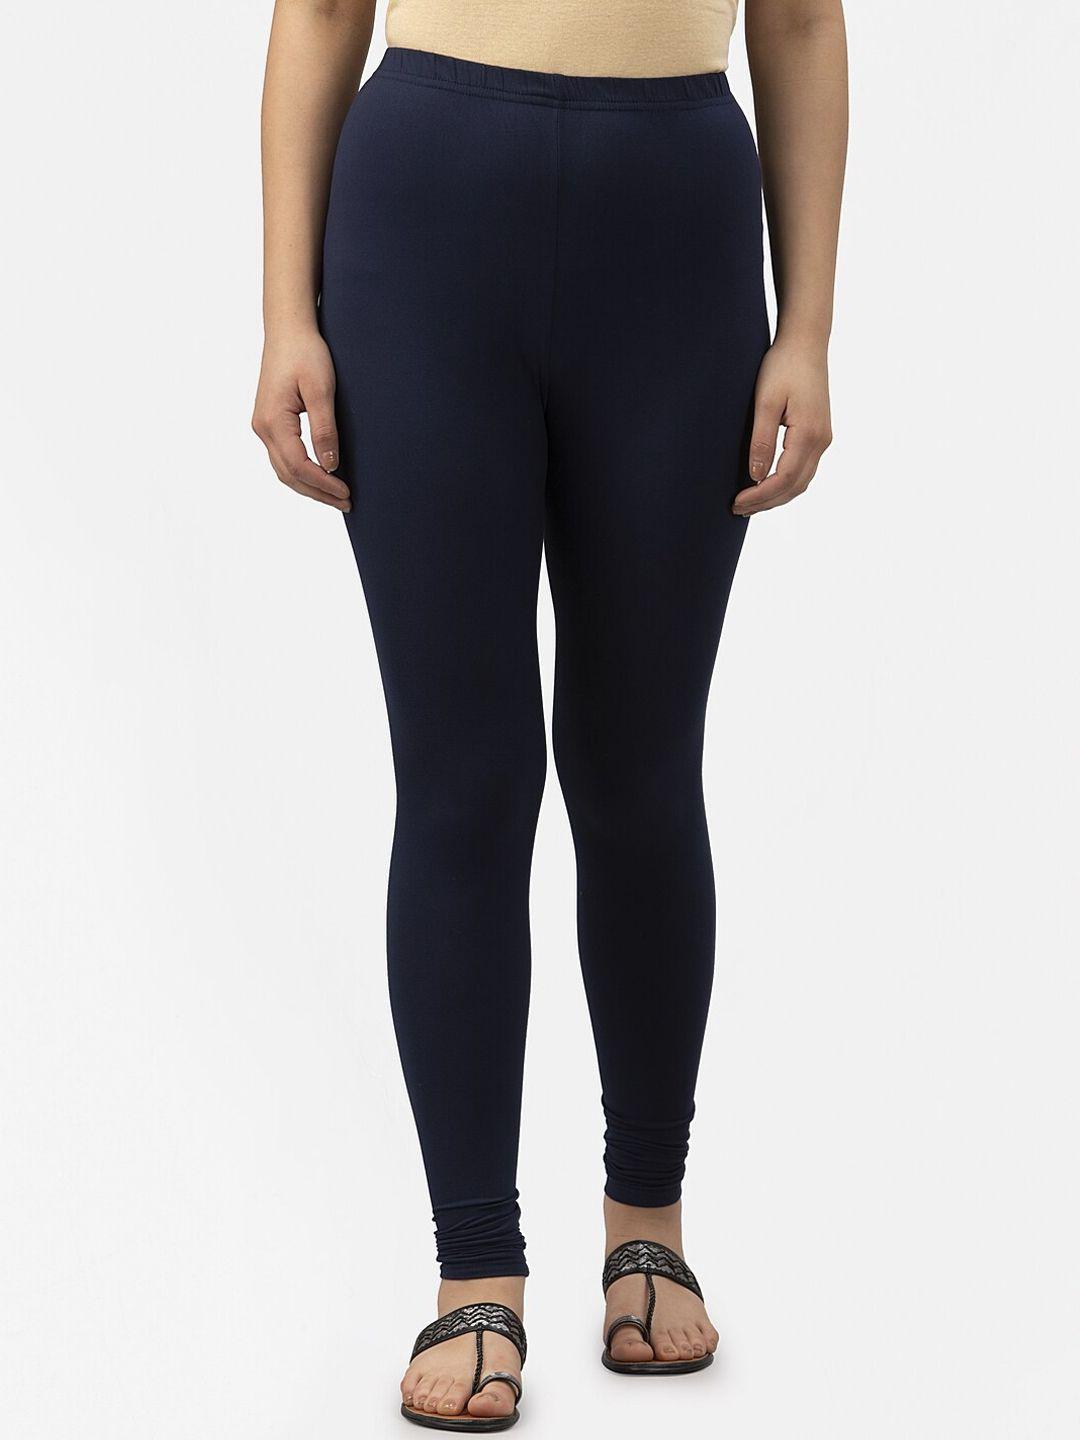 style quotient women navy blue solid ankle-length leggings